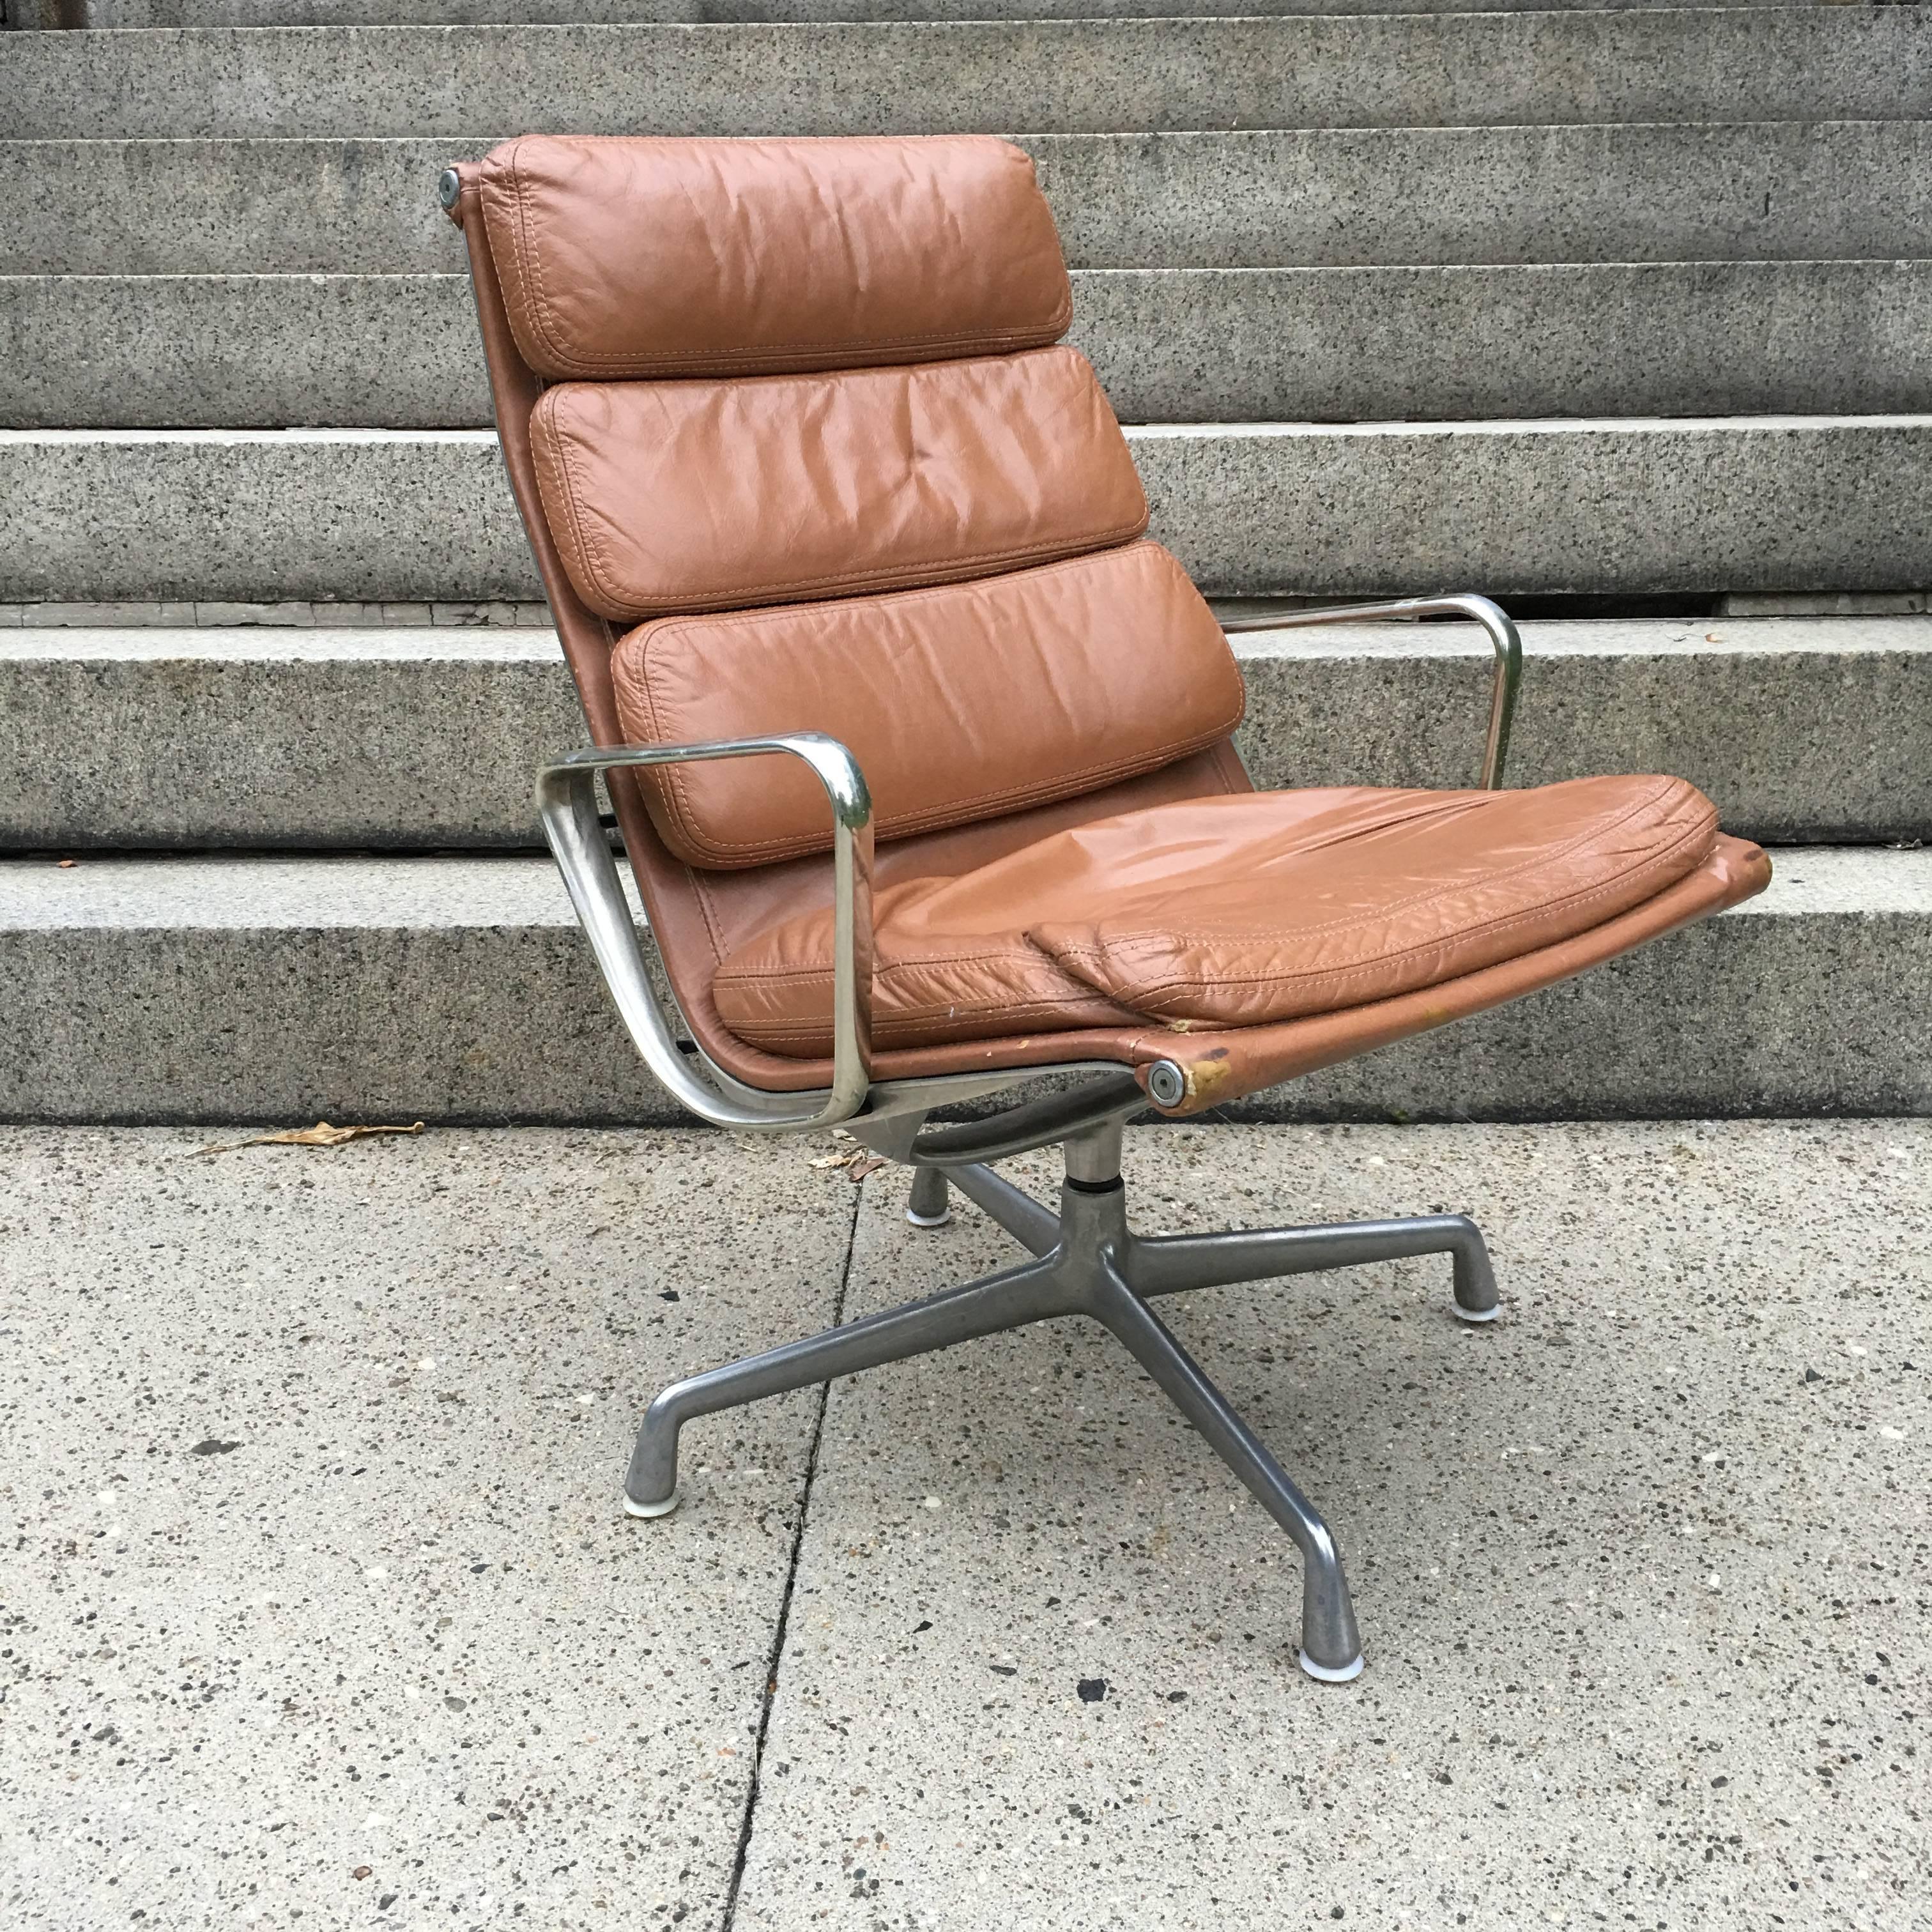 Herman Miller Eames Aluminum Group soft pad lounge chair. Gorgeous caramel leather in good condition. No tears. From the 1970s.